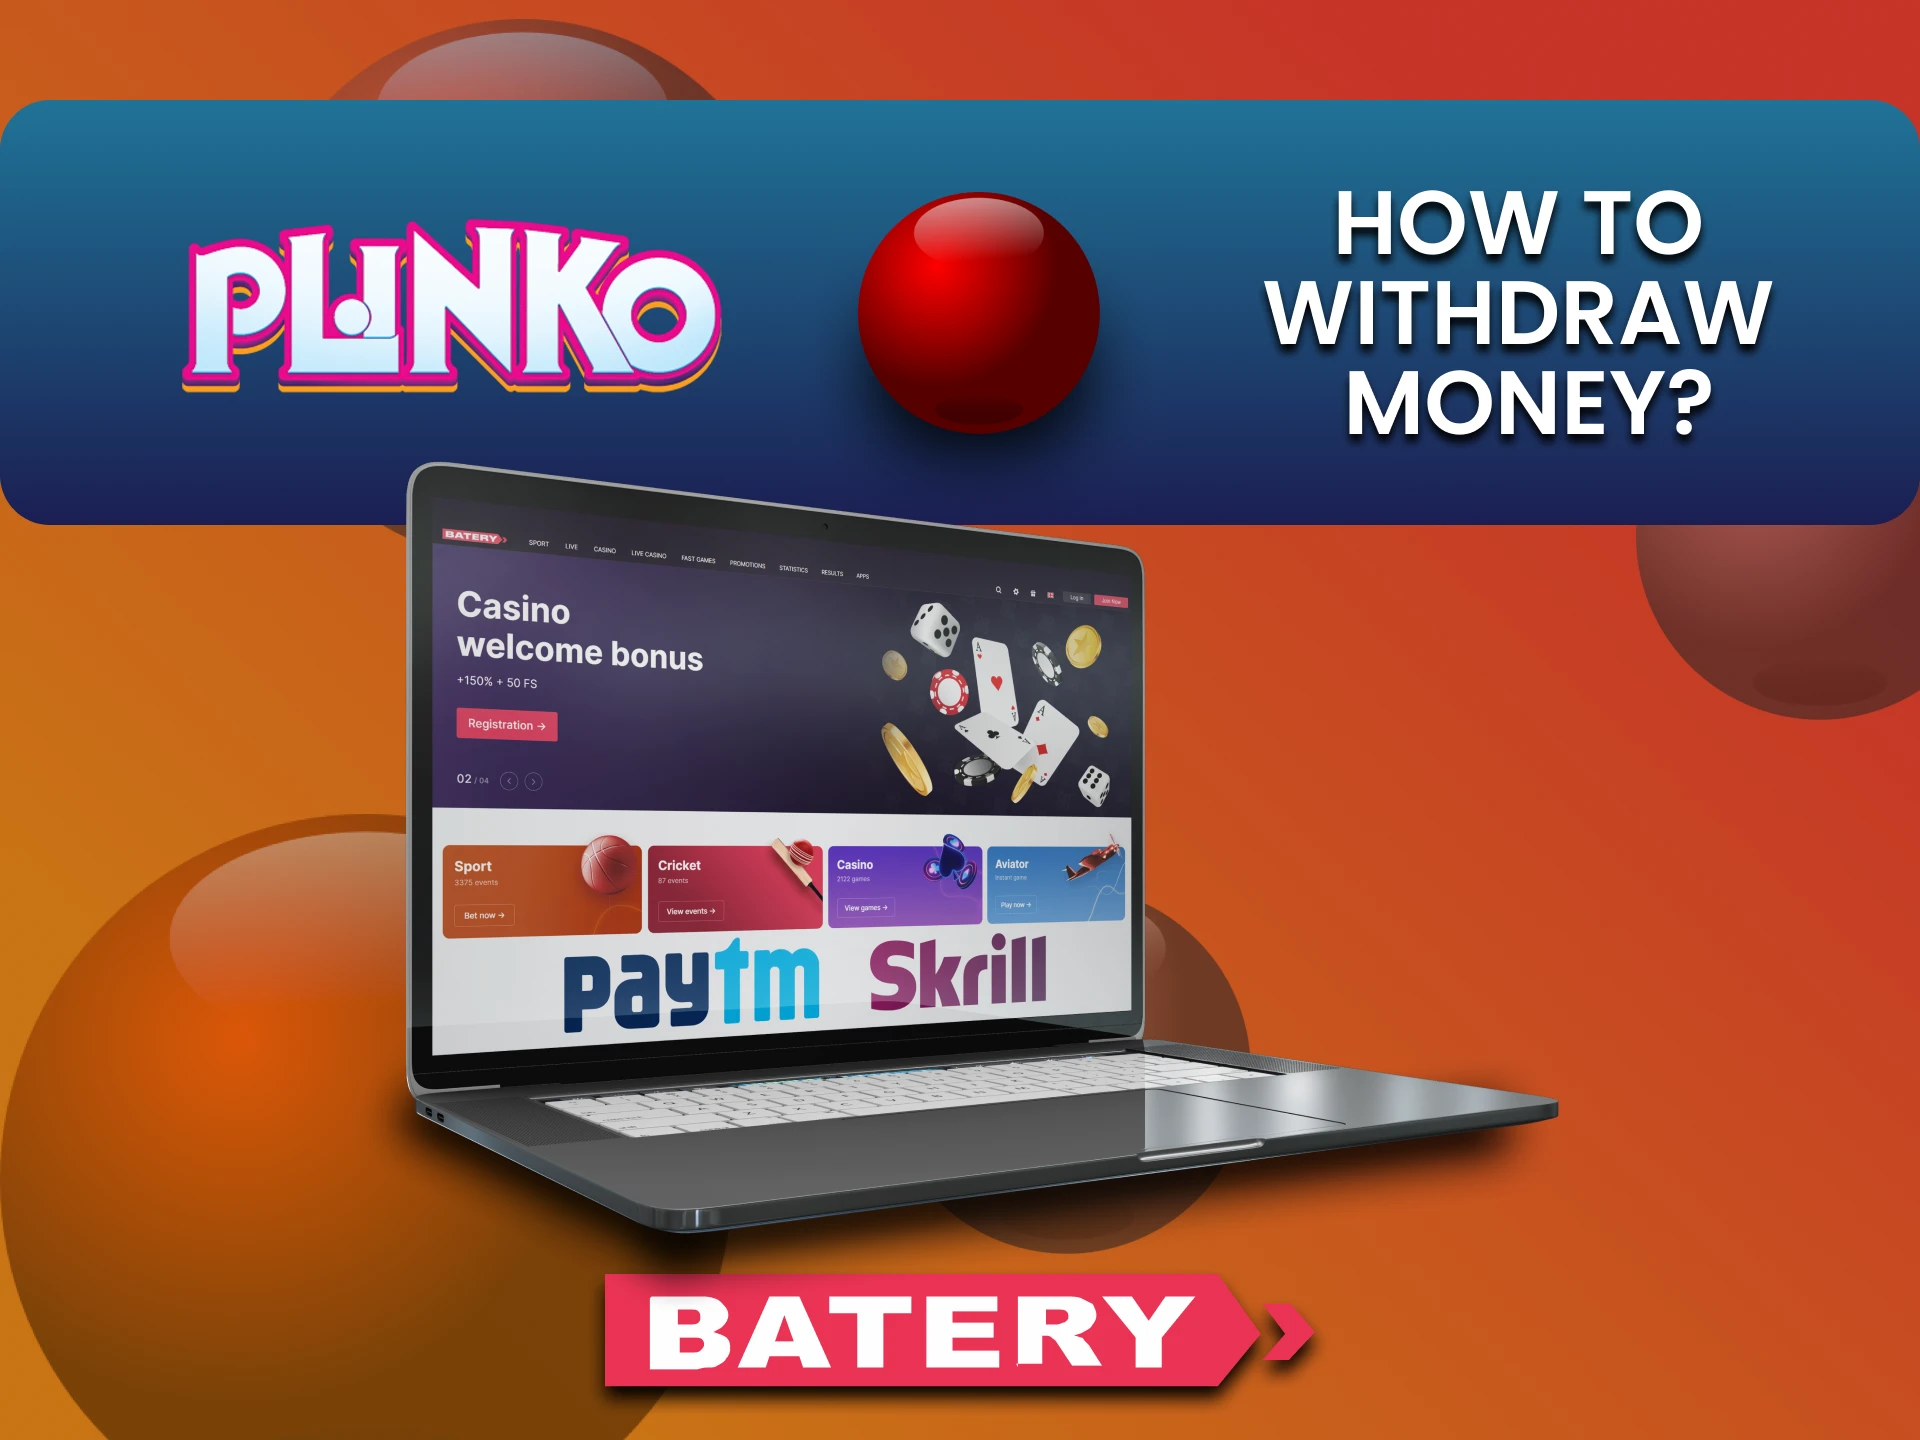 Learn how to withdraw funds on the Batery website for the game Plinko.